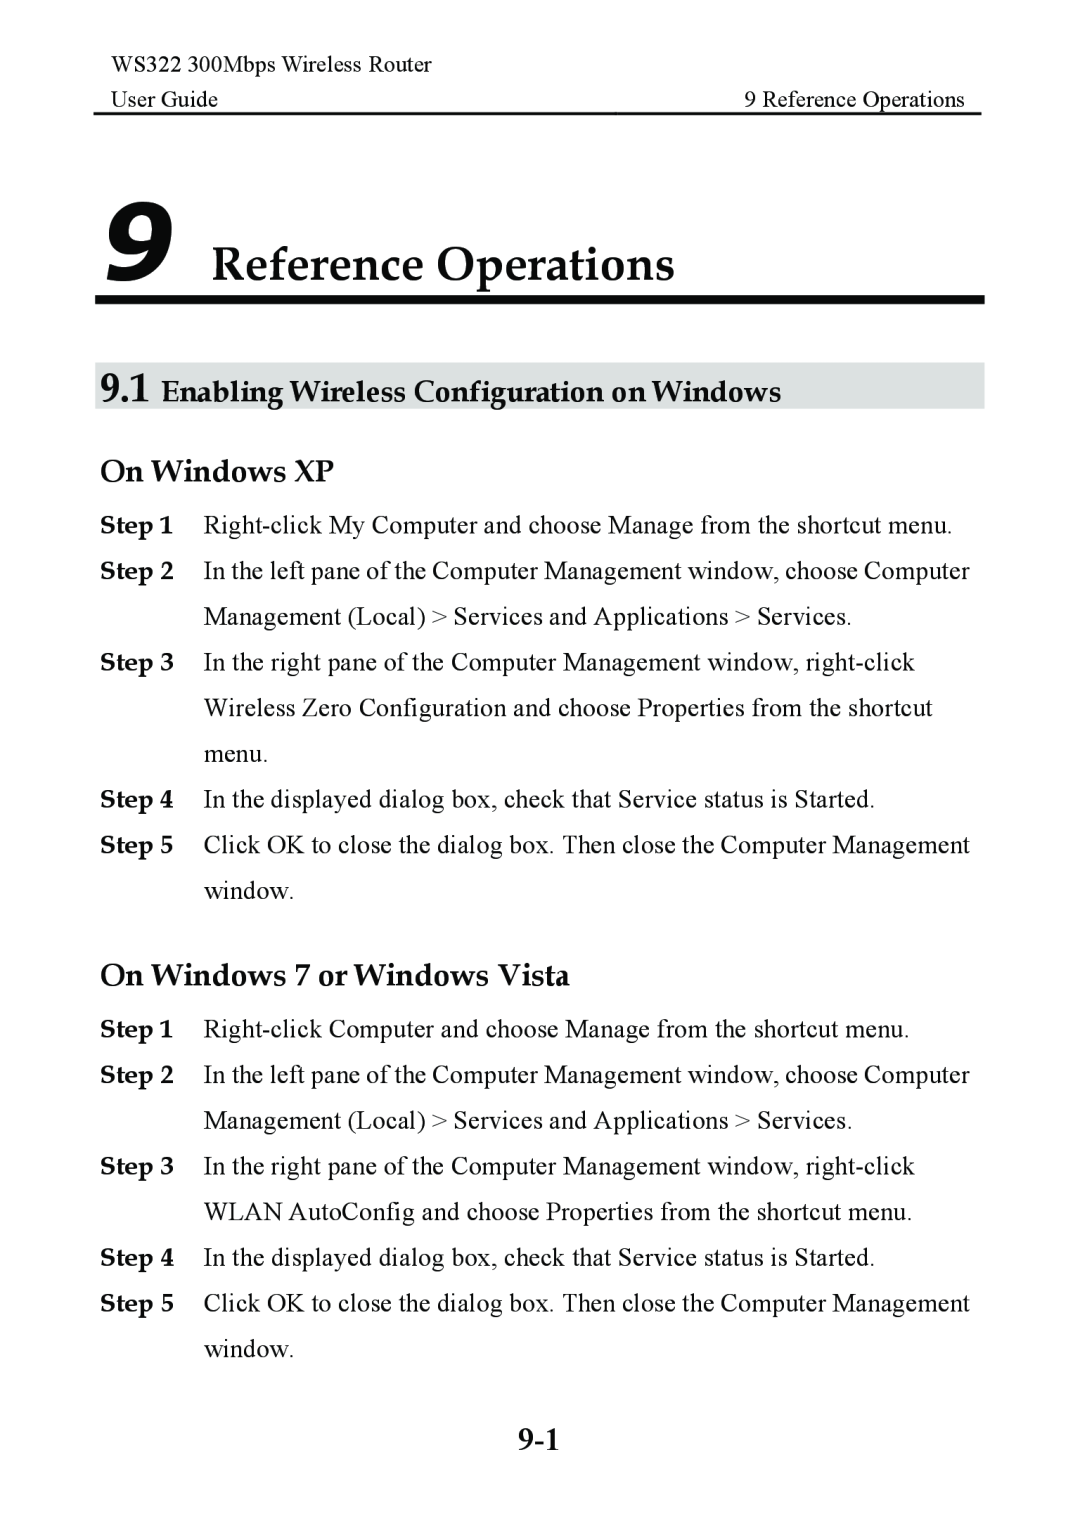 Huawei WS322 manual Reference Operations, On Windows XP, On Windows 7 or Windows Vista 